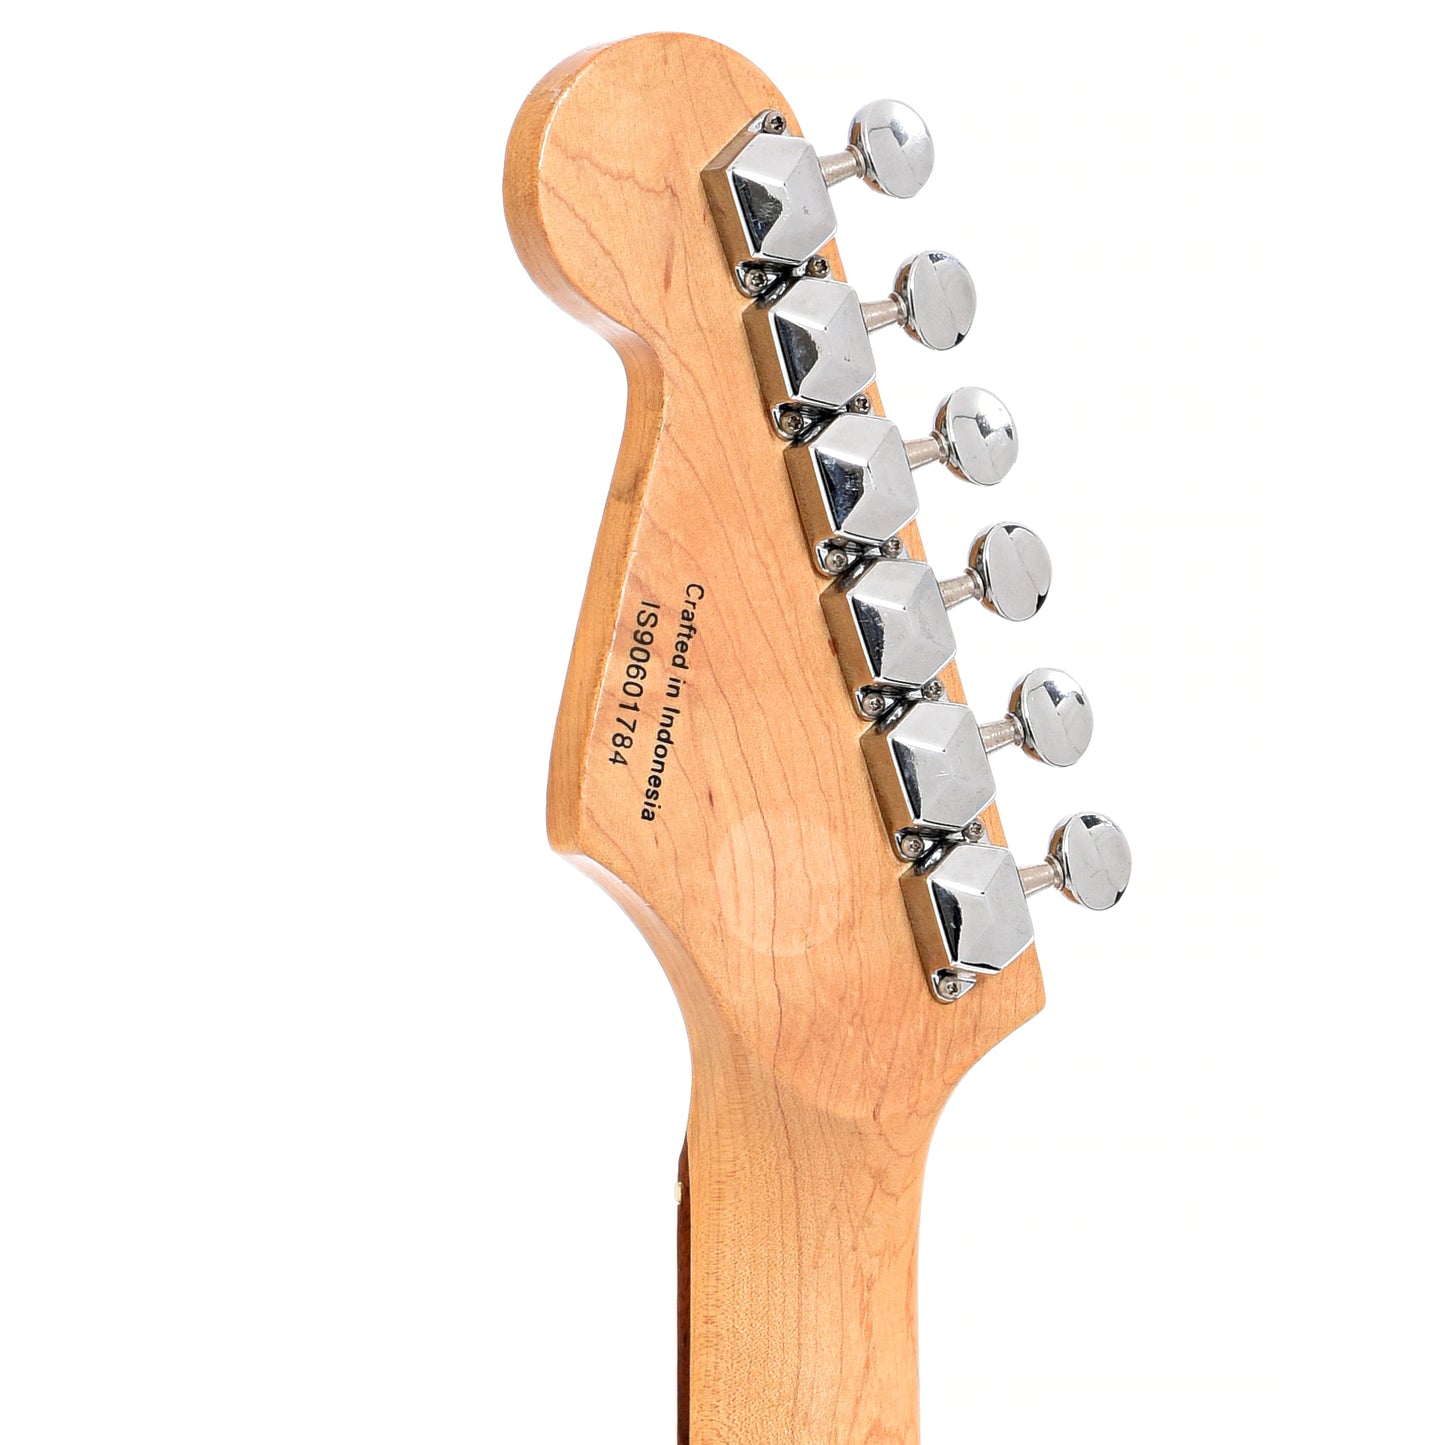 Back headstock of Squier Mini Stratocaster Electric Guitar